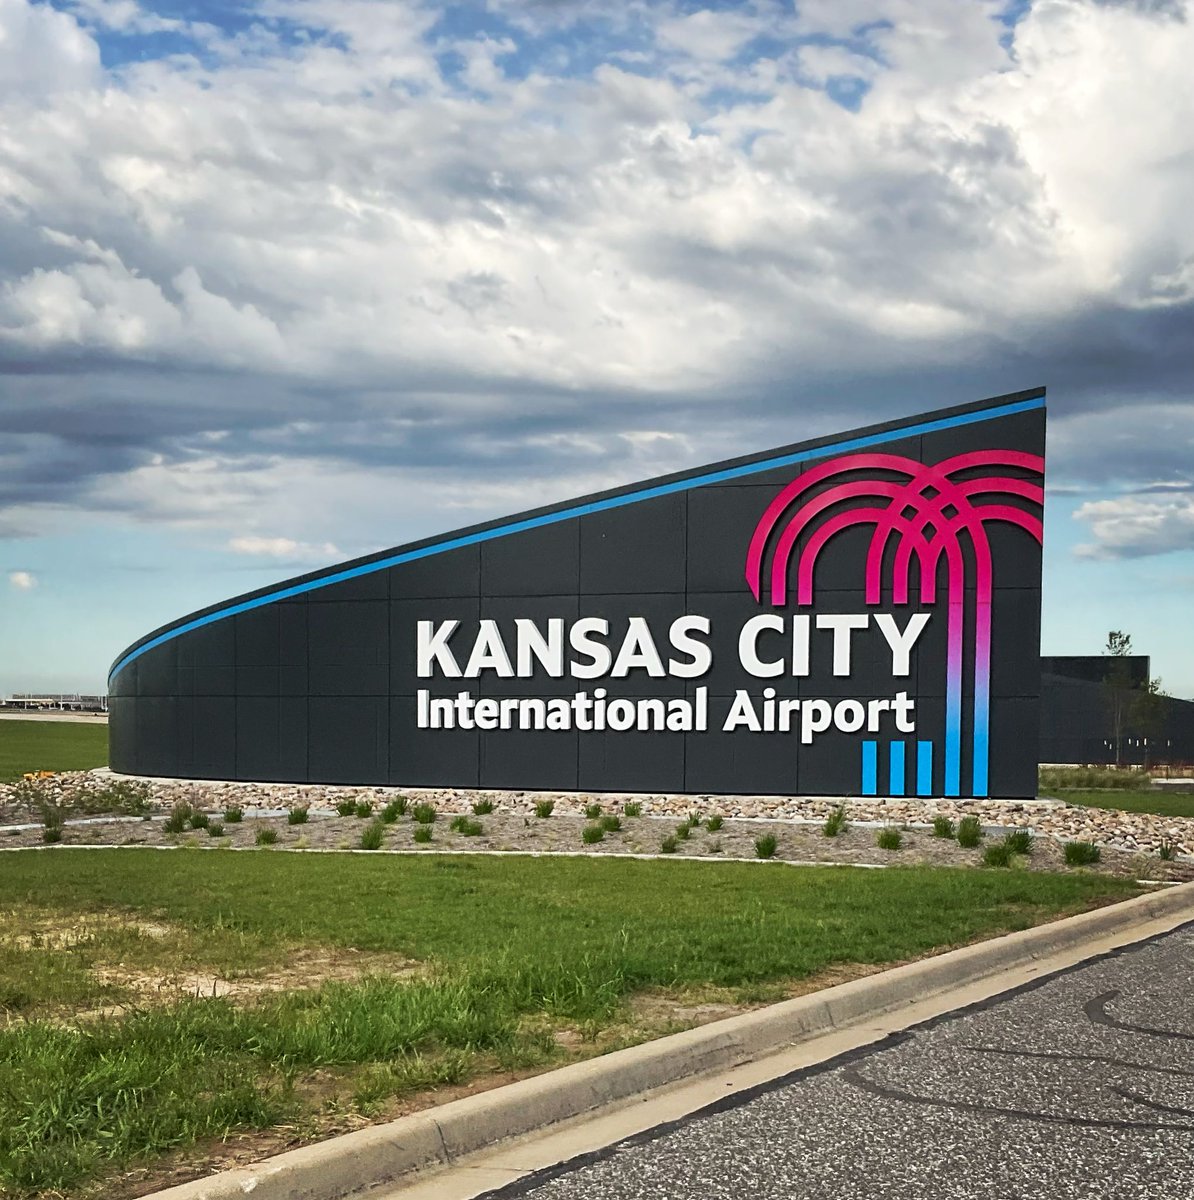 KANSAS CITY INTERNATIONAL AIRPORT. Let’s Fly… Let’s Fly Away… @Fly_KansasCity Airport. Fully Restocked Products designed to complement your LifeStyle. *Available in various locations throughout the airport ✈️. For more information visit shopBIYB.com. #KCI #Airport